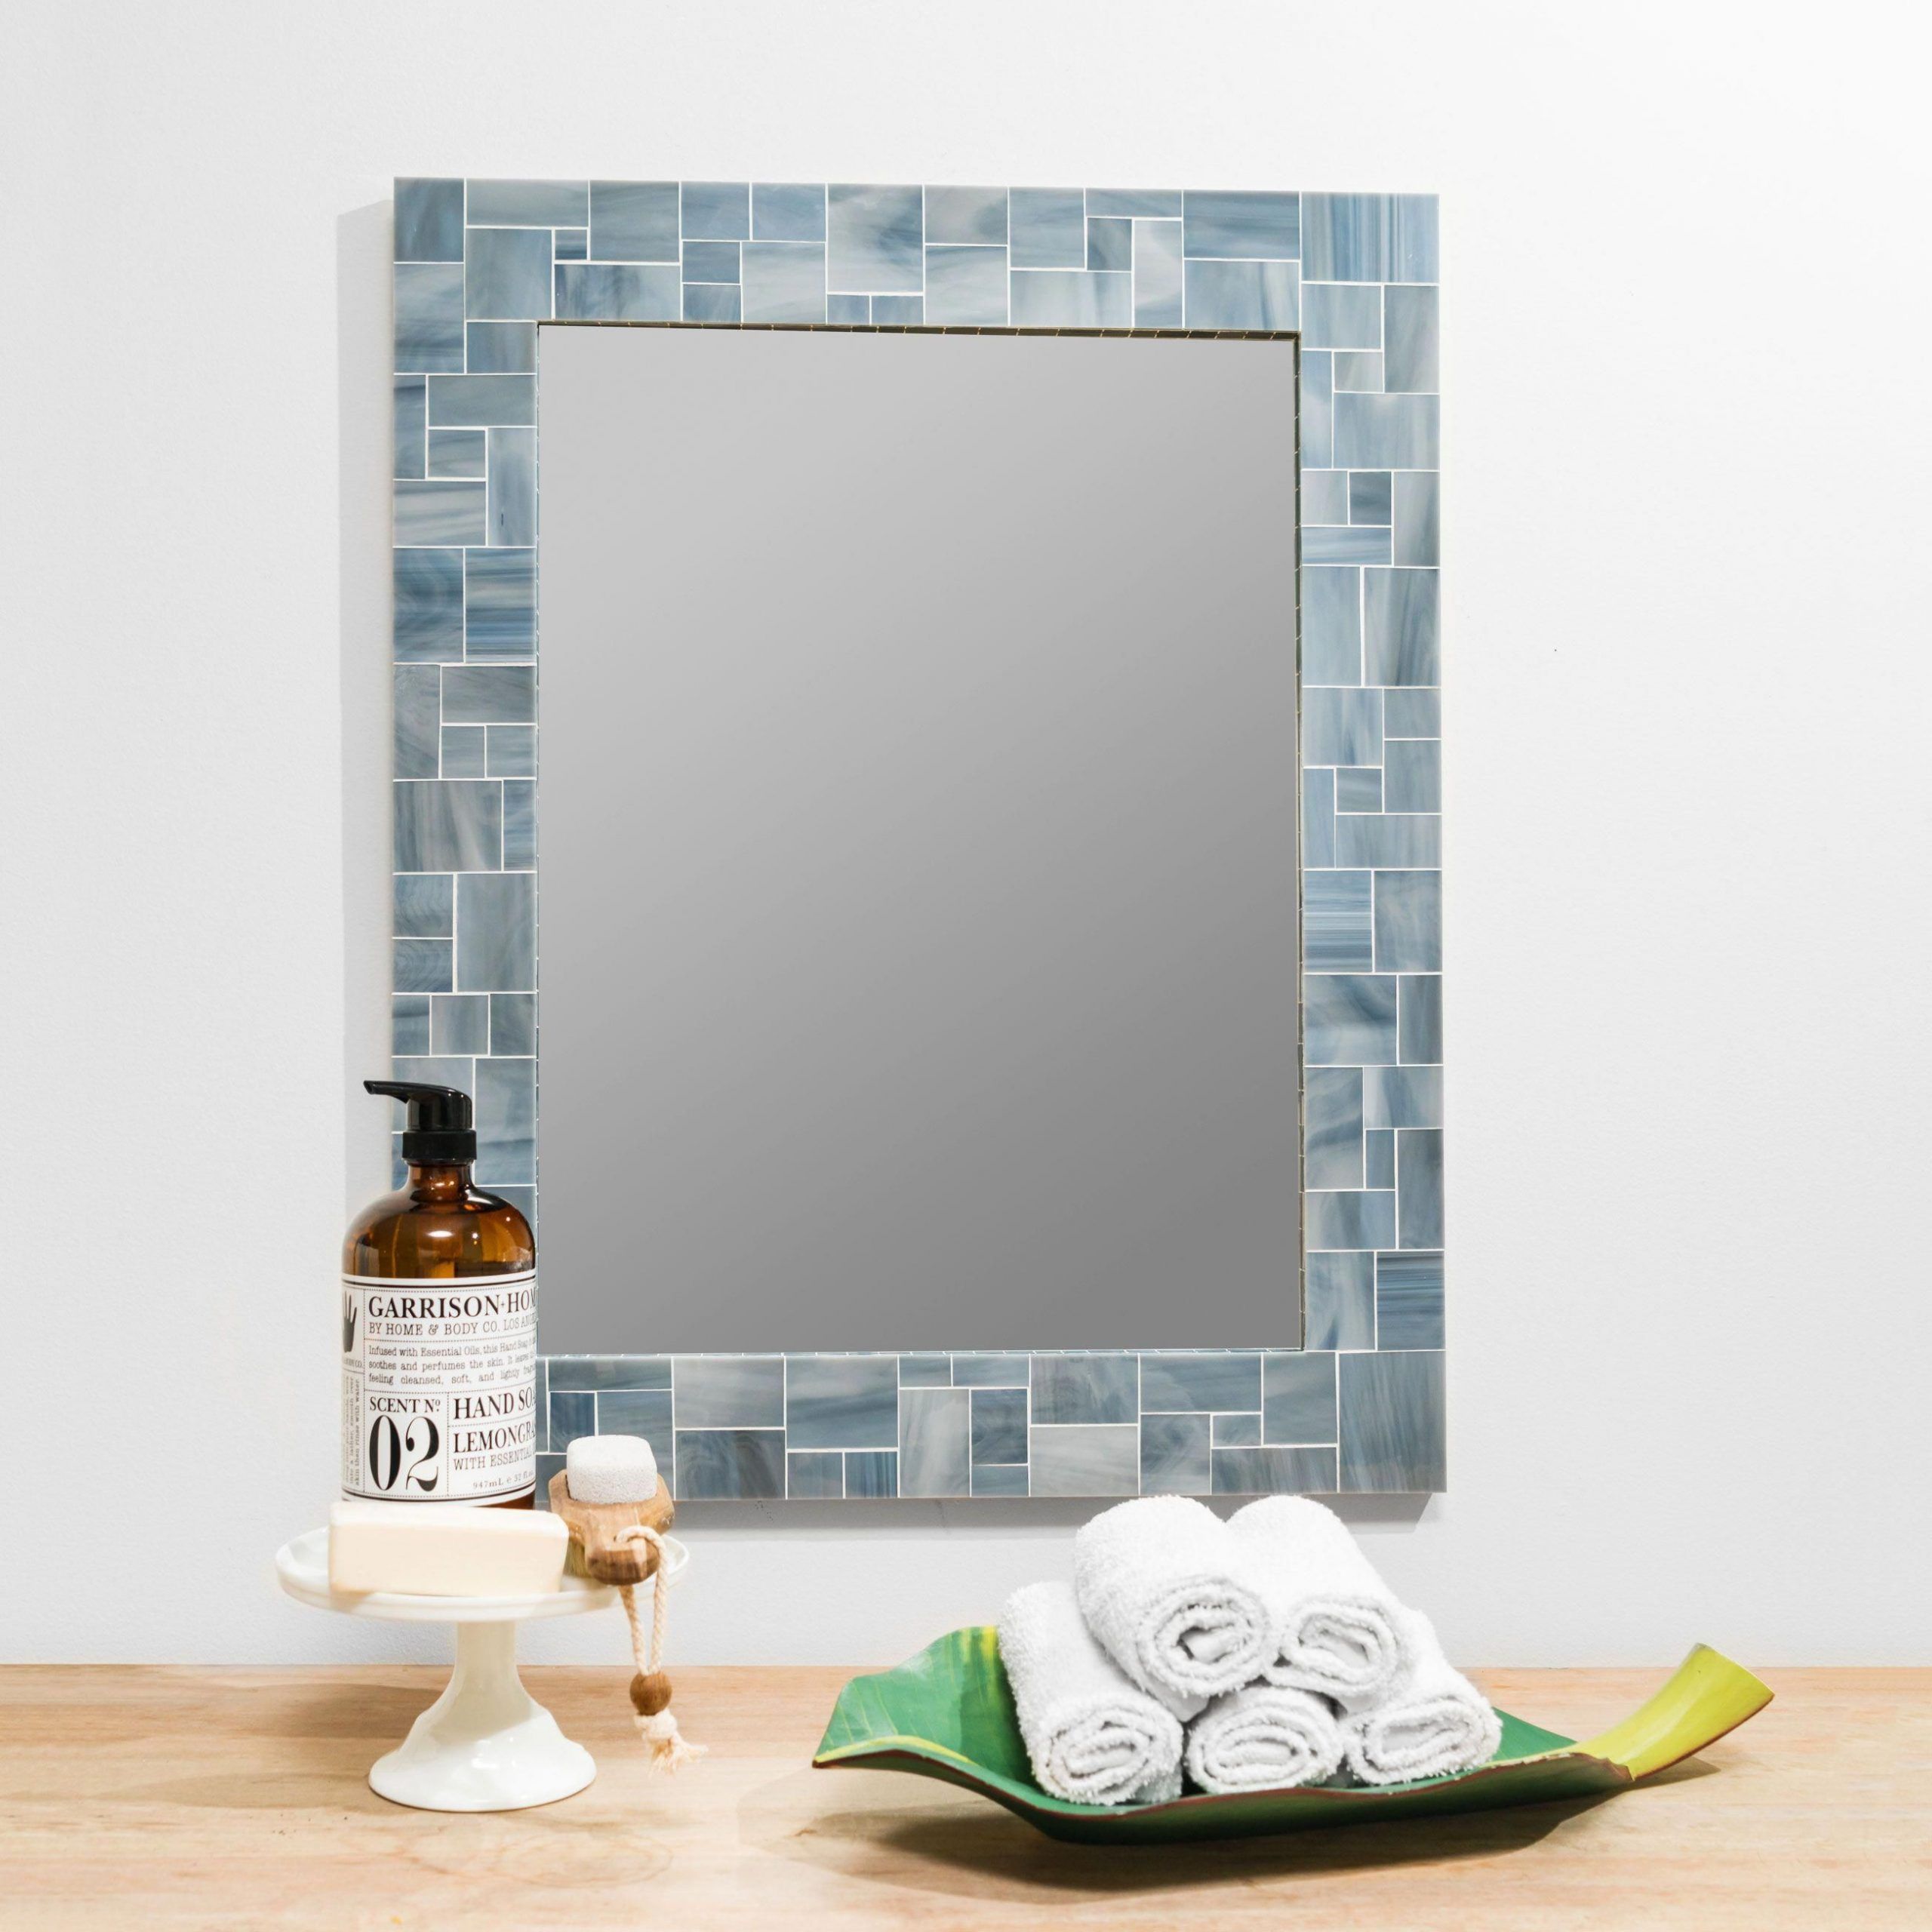 Grey Bathroom Mirror – Mosaic Wall Mirrorlive In Mosaics – 5 Sizes Throughout Steel Gray Wall Mirrors (View 8 of 15)